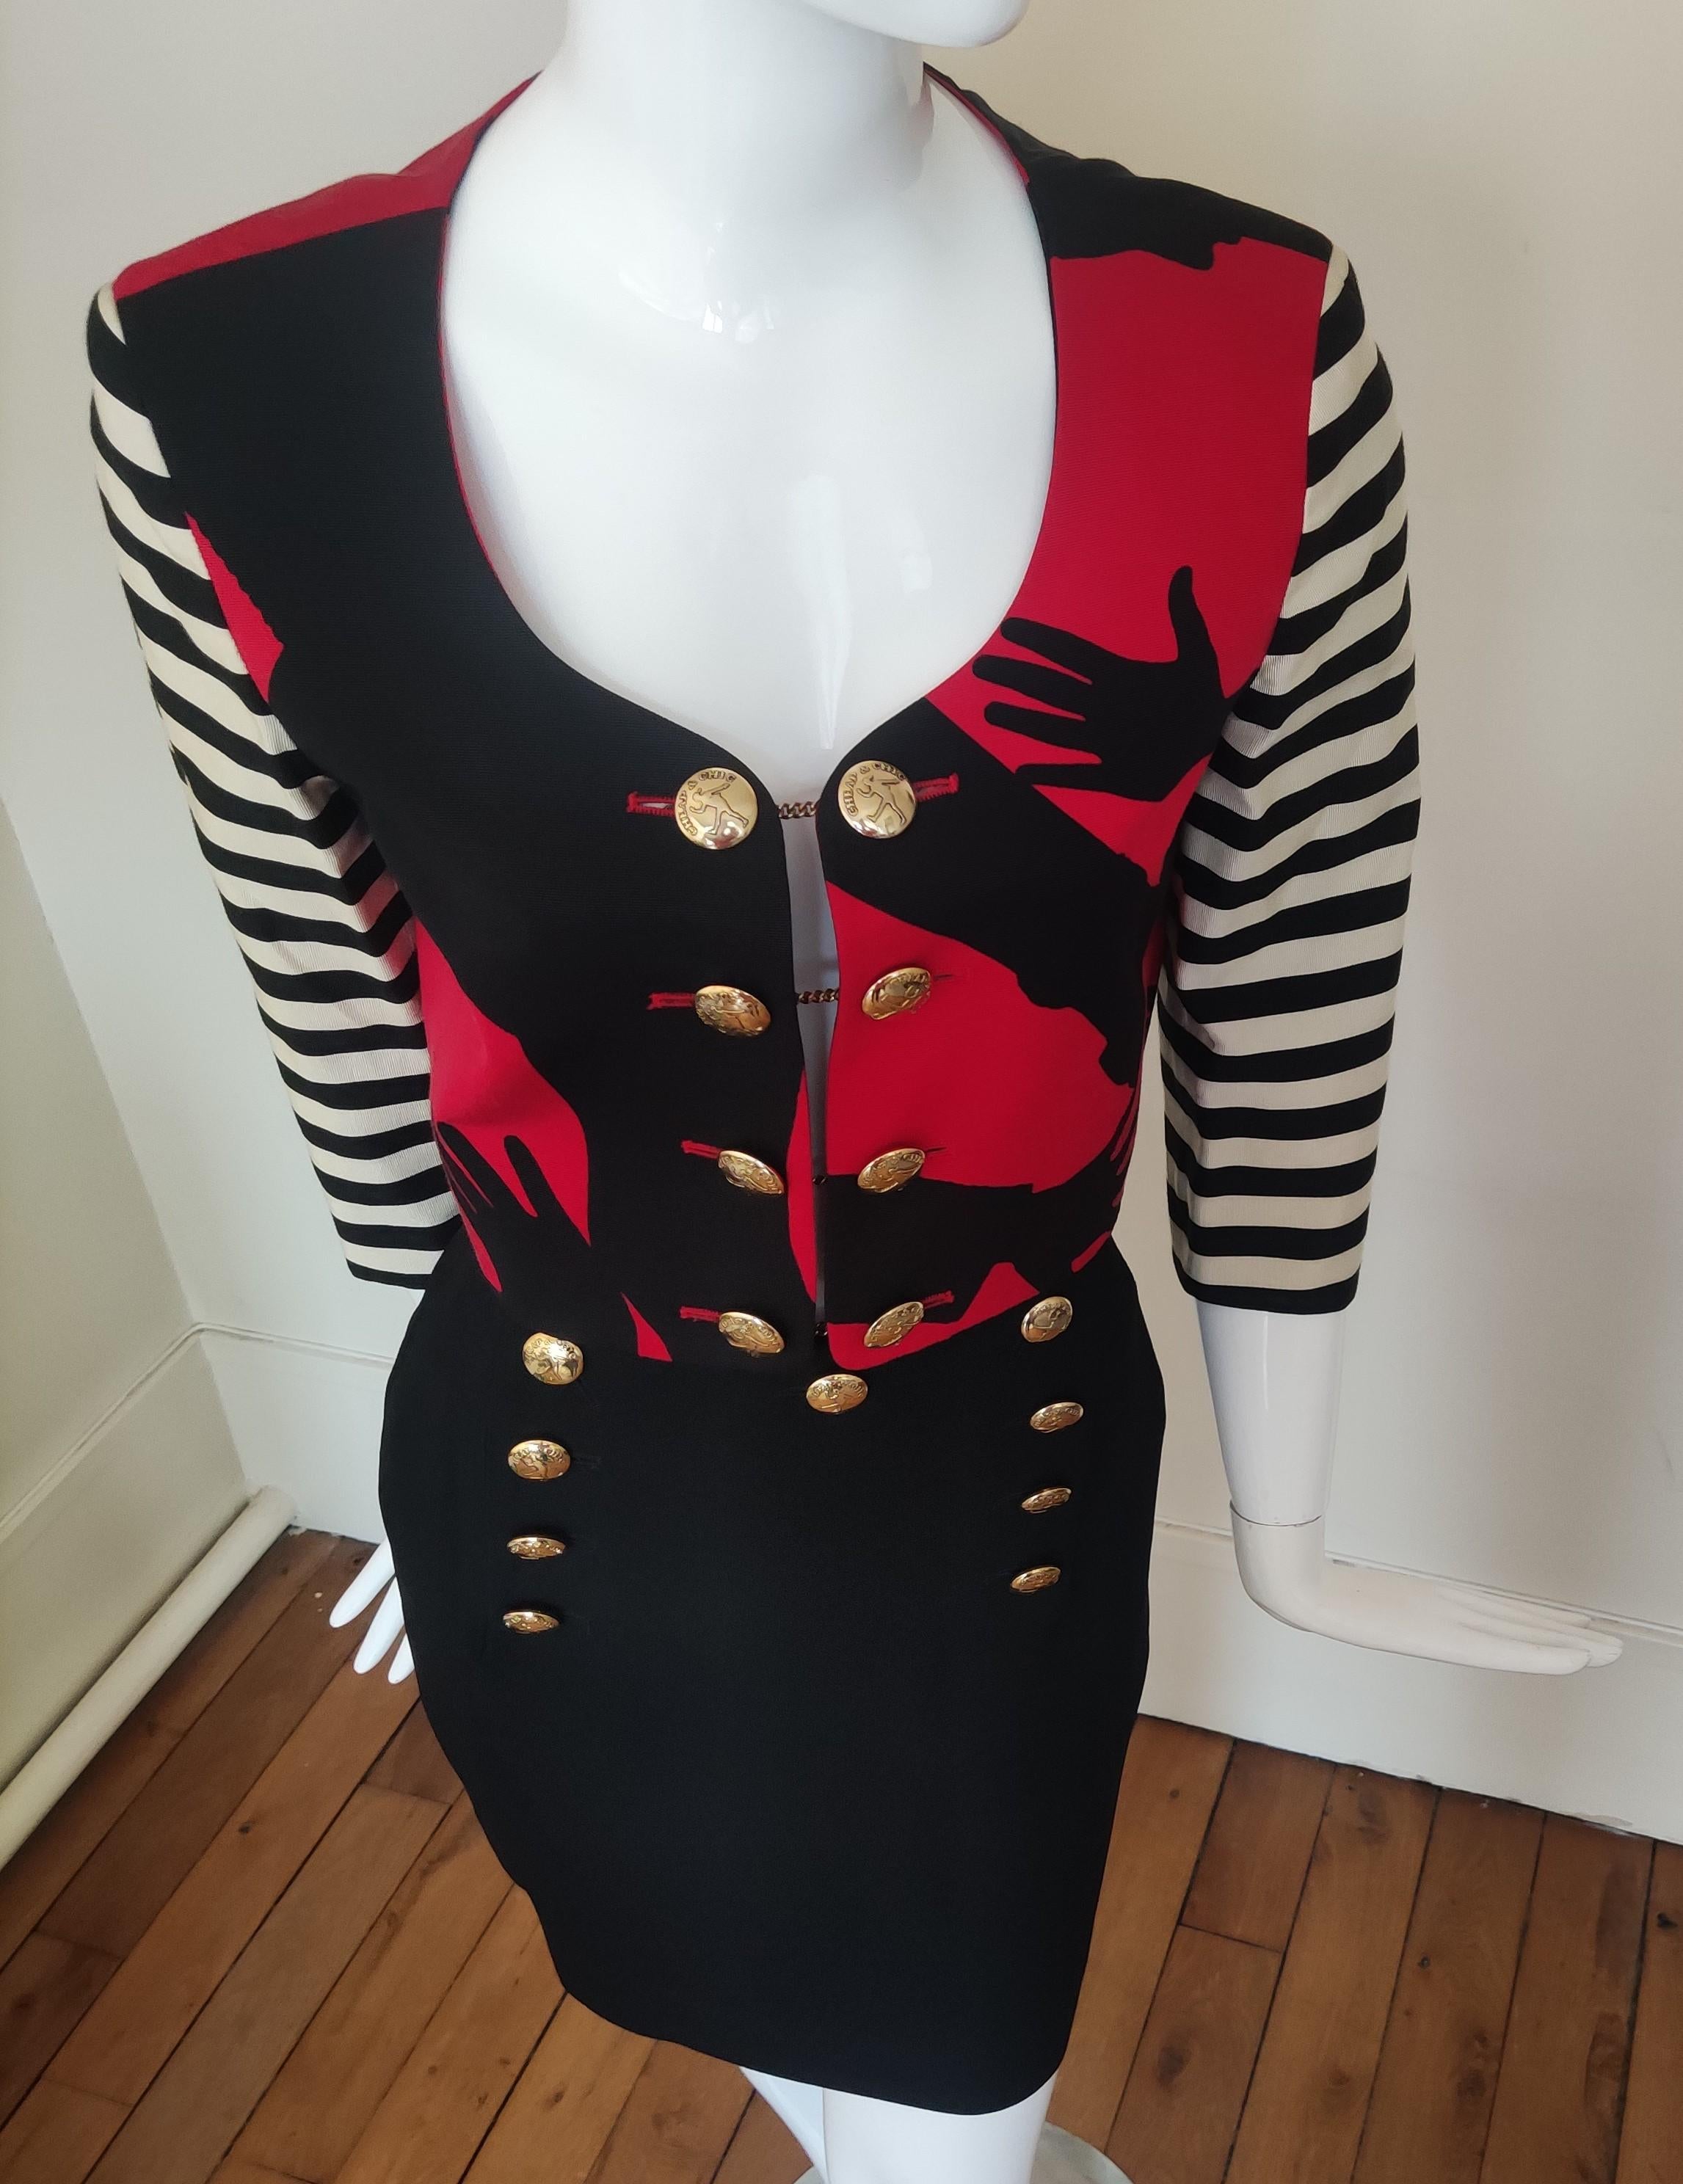 Moschino Cheap and Chic Olive Oyl Popeye Arms Legs Shadow The Nanny Couture Suit For Sale 4